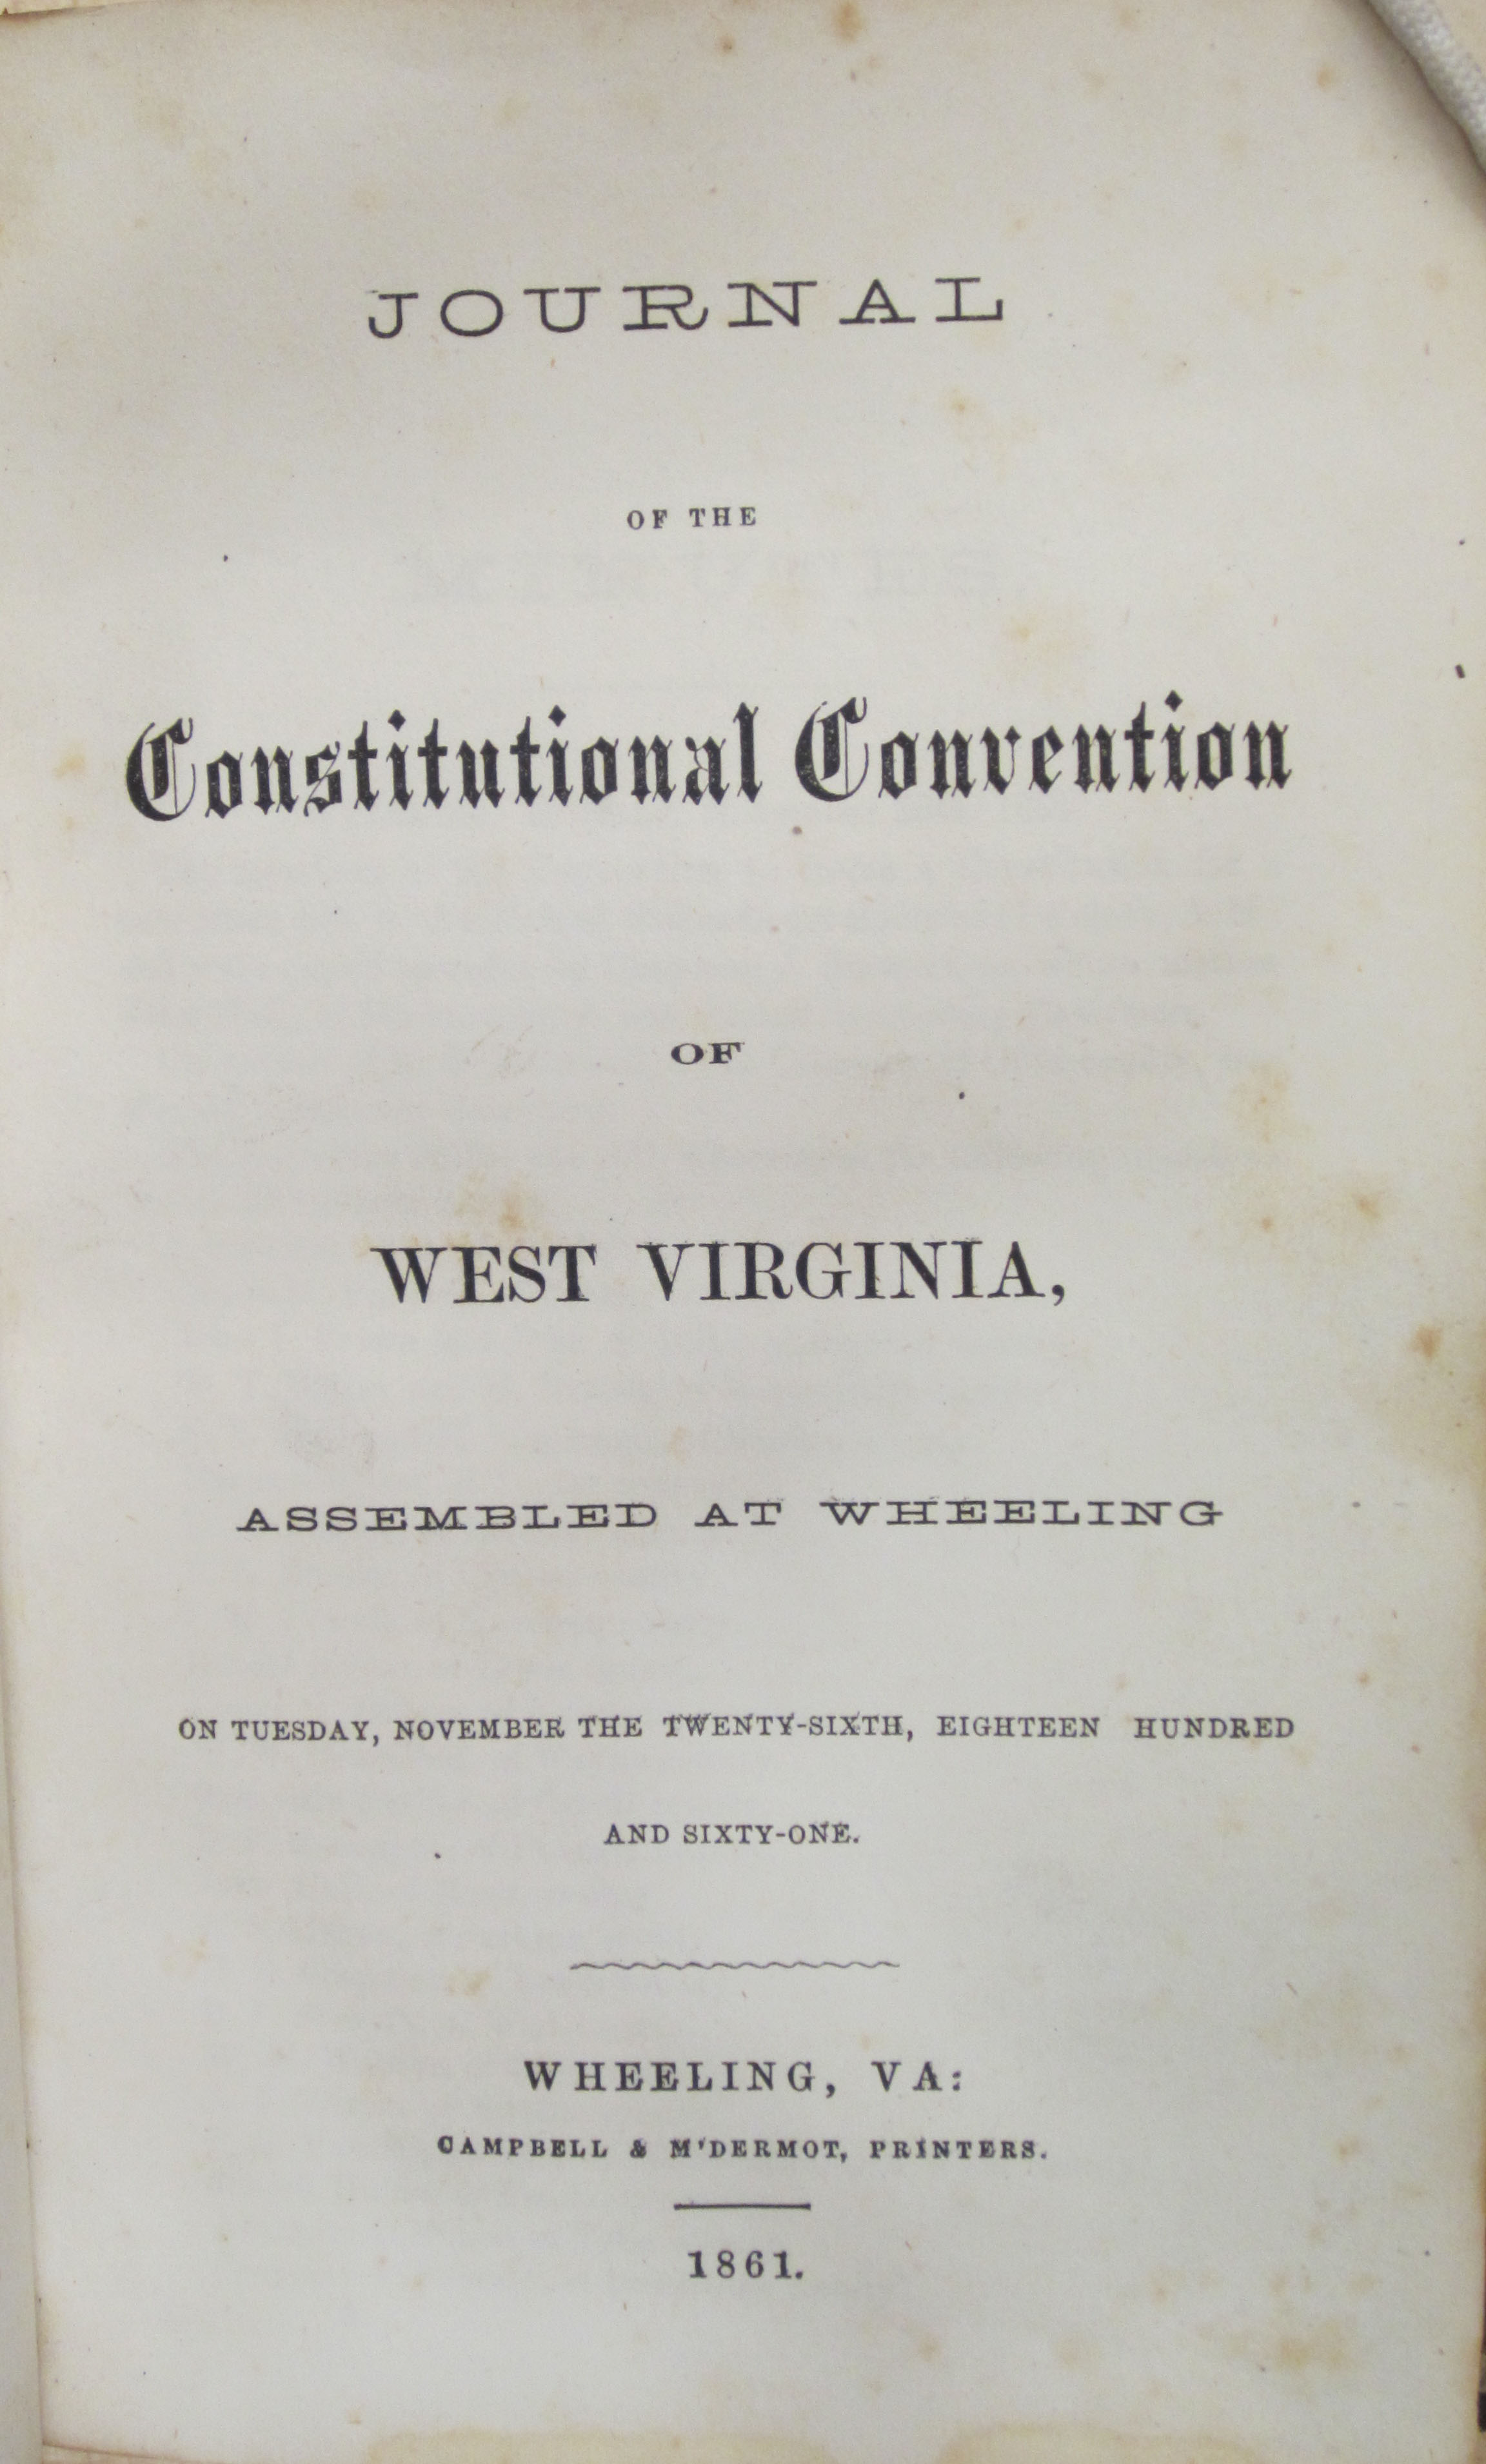 Journal of the Constitutional Convention of West Virginia Assembled at Wheeling on Tuesday, November Twenty-Sixth, Eighteen Hundred and Sixty-One (A 1861 .W478. Tracy W. McGregor Library of American History. Photograph by Petrina Jackson)